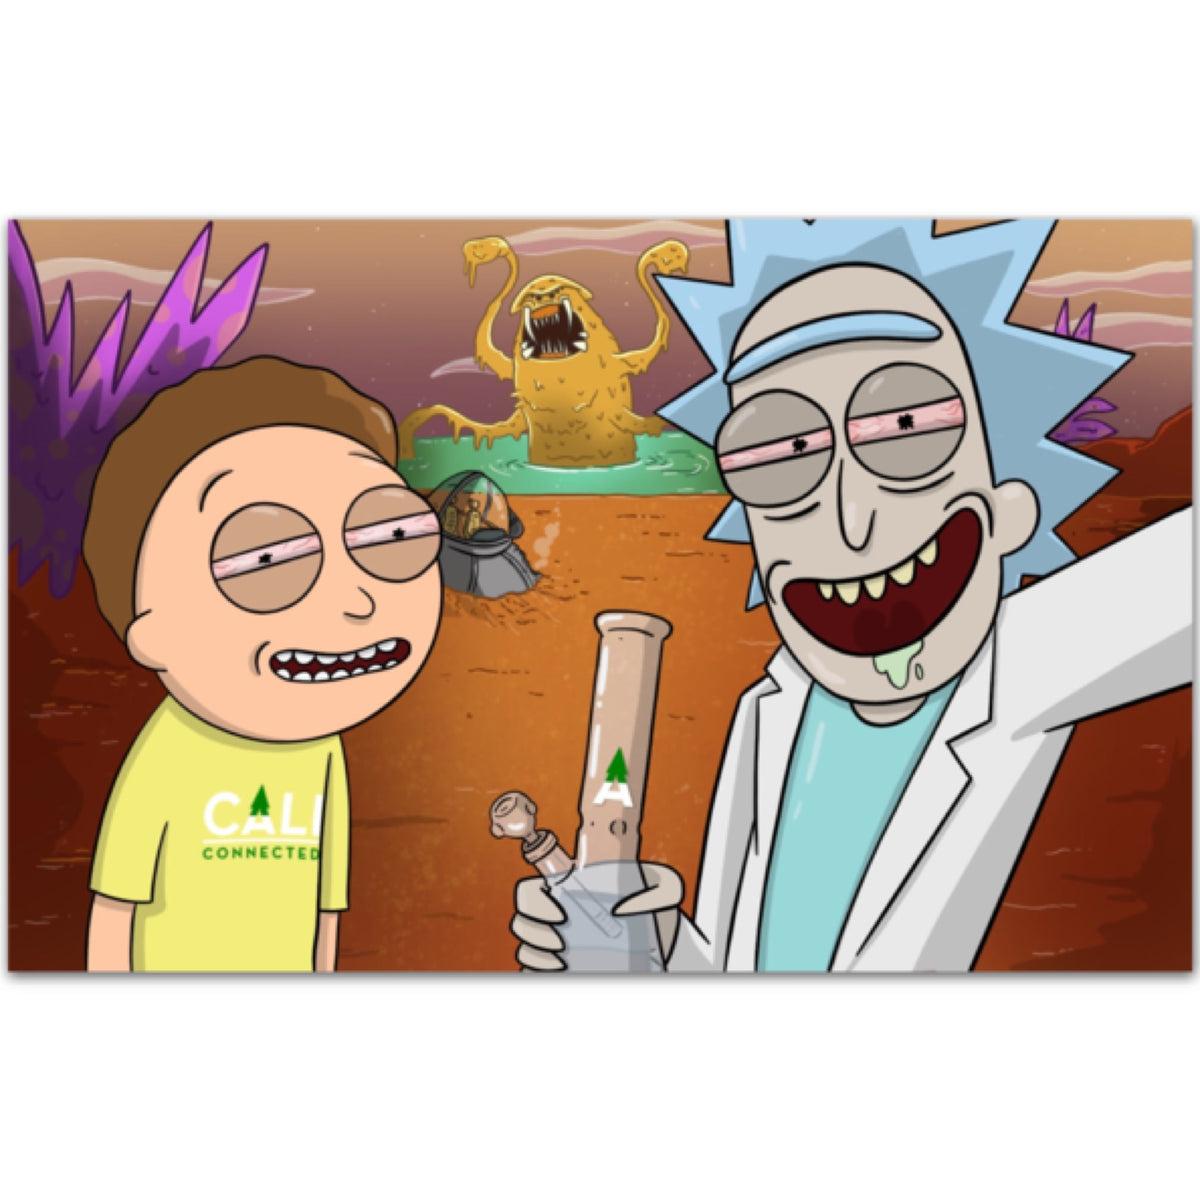 1200 x 1200 · jpeg - Weed Rick And Morty Background / Rick And Morty Wallpaper Smoking Weed ...